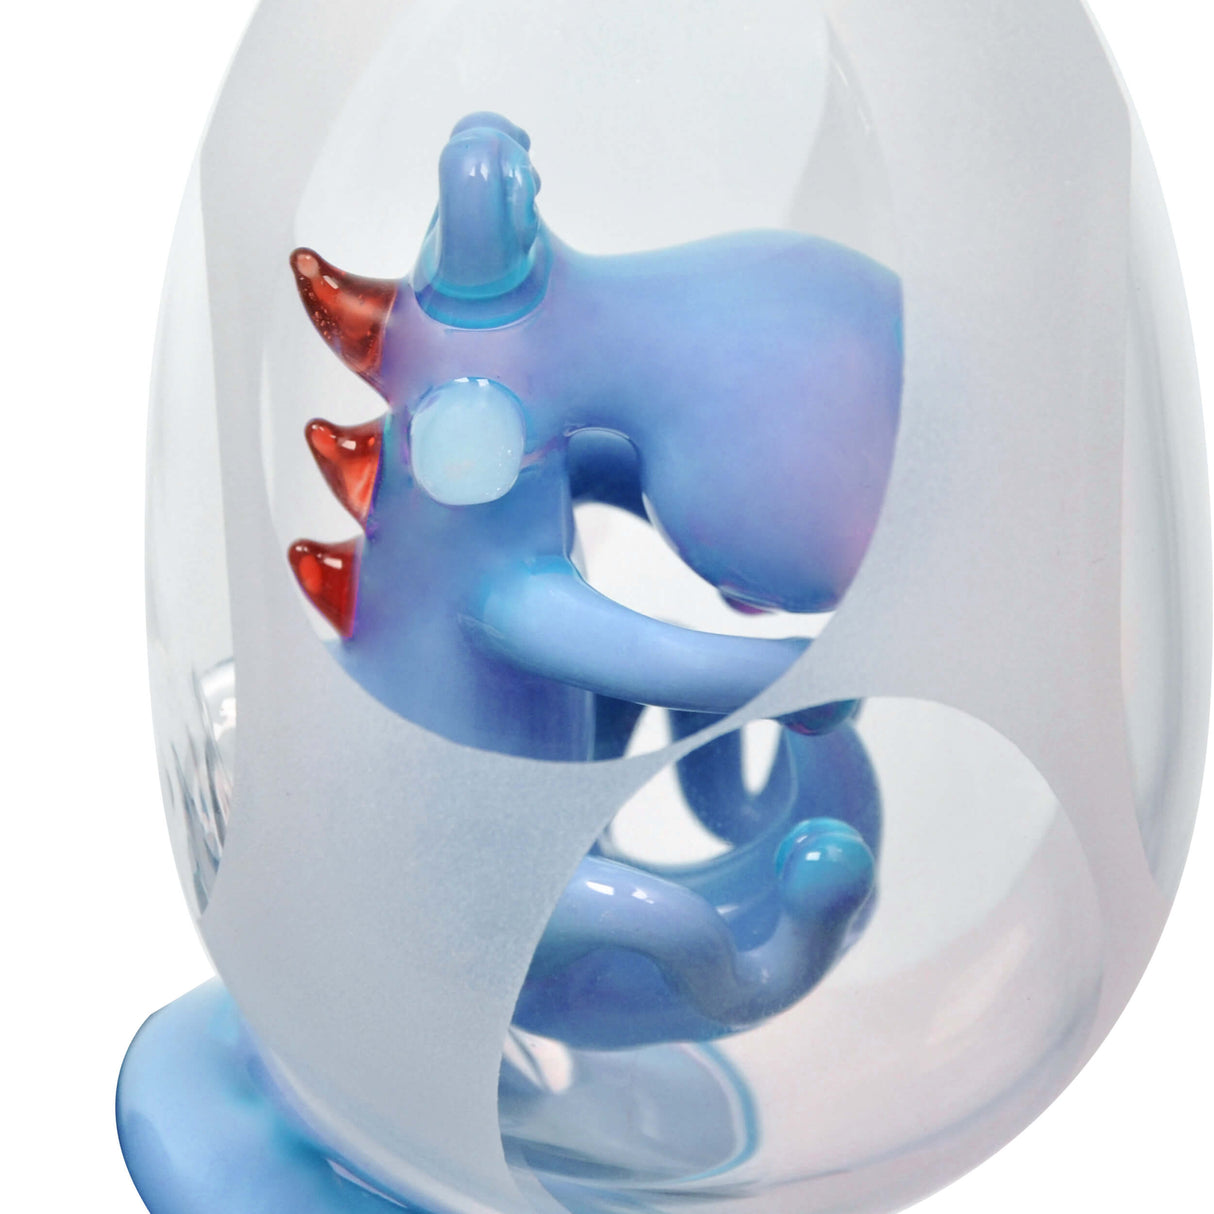 Calibear Puffco Peak frosted glass attachment with Yoshi egg design, close-up view